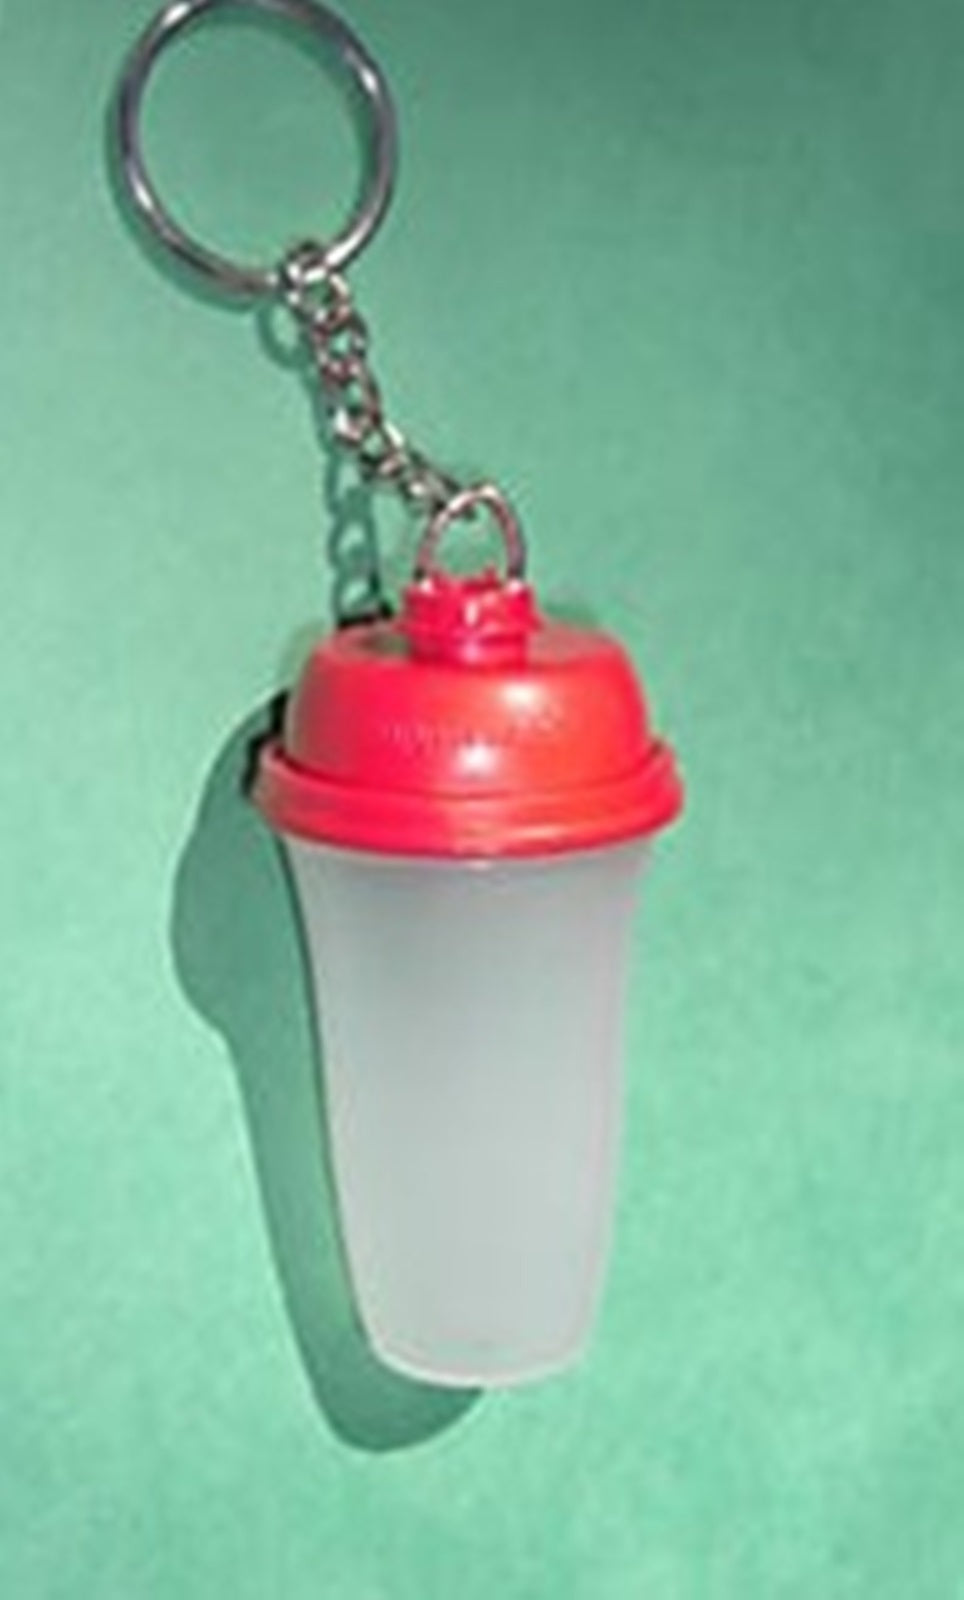 TUPPERWARE ORIGINAL STYLE Mini QUICK SHAKE Keeper Container KeyChain 1 RED